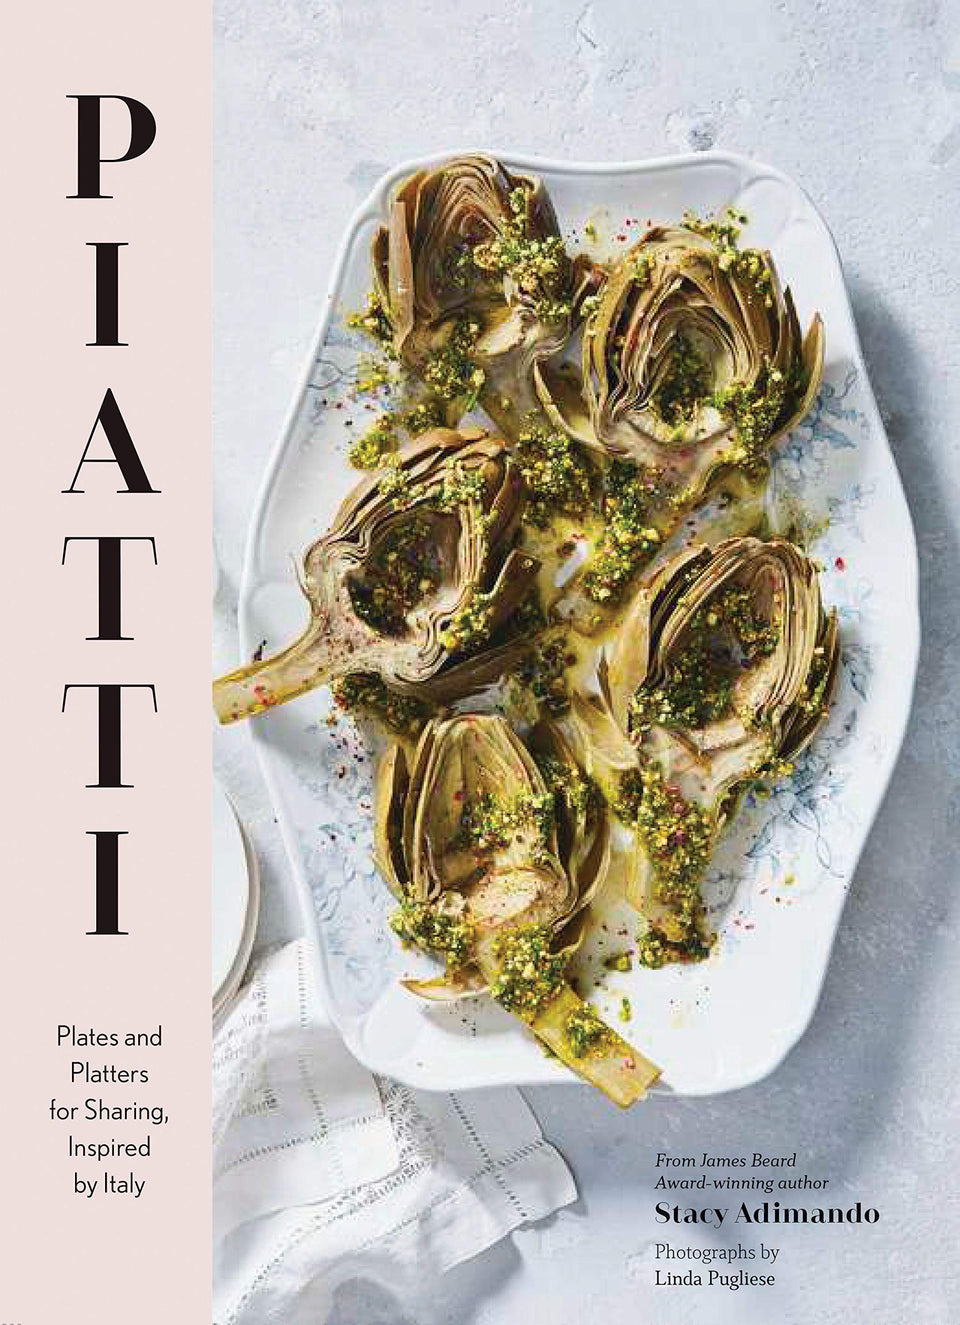 Piatti: Plates and Platters for Sharing